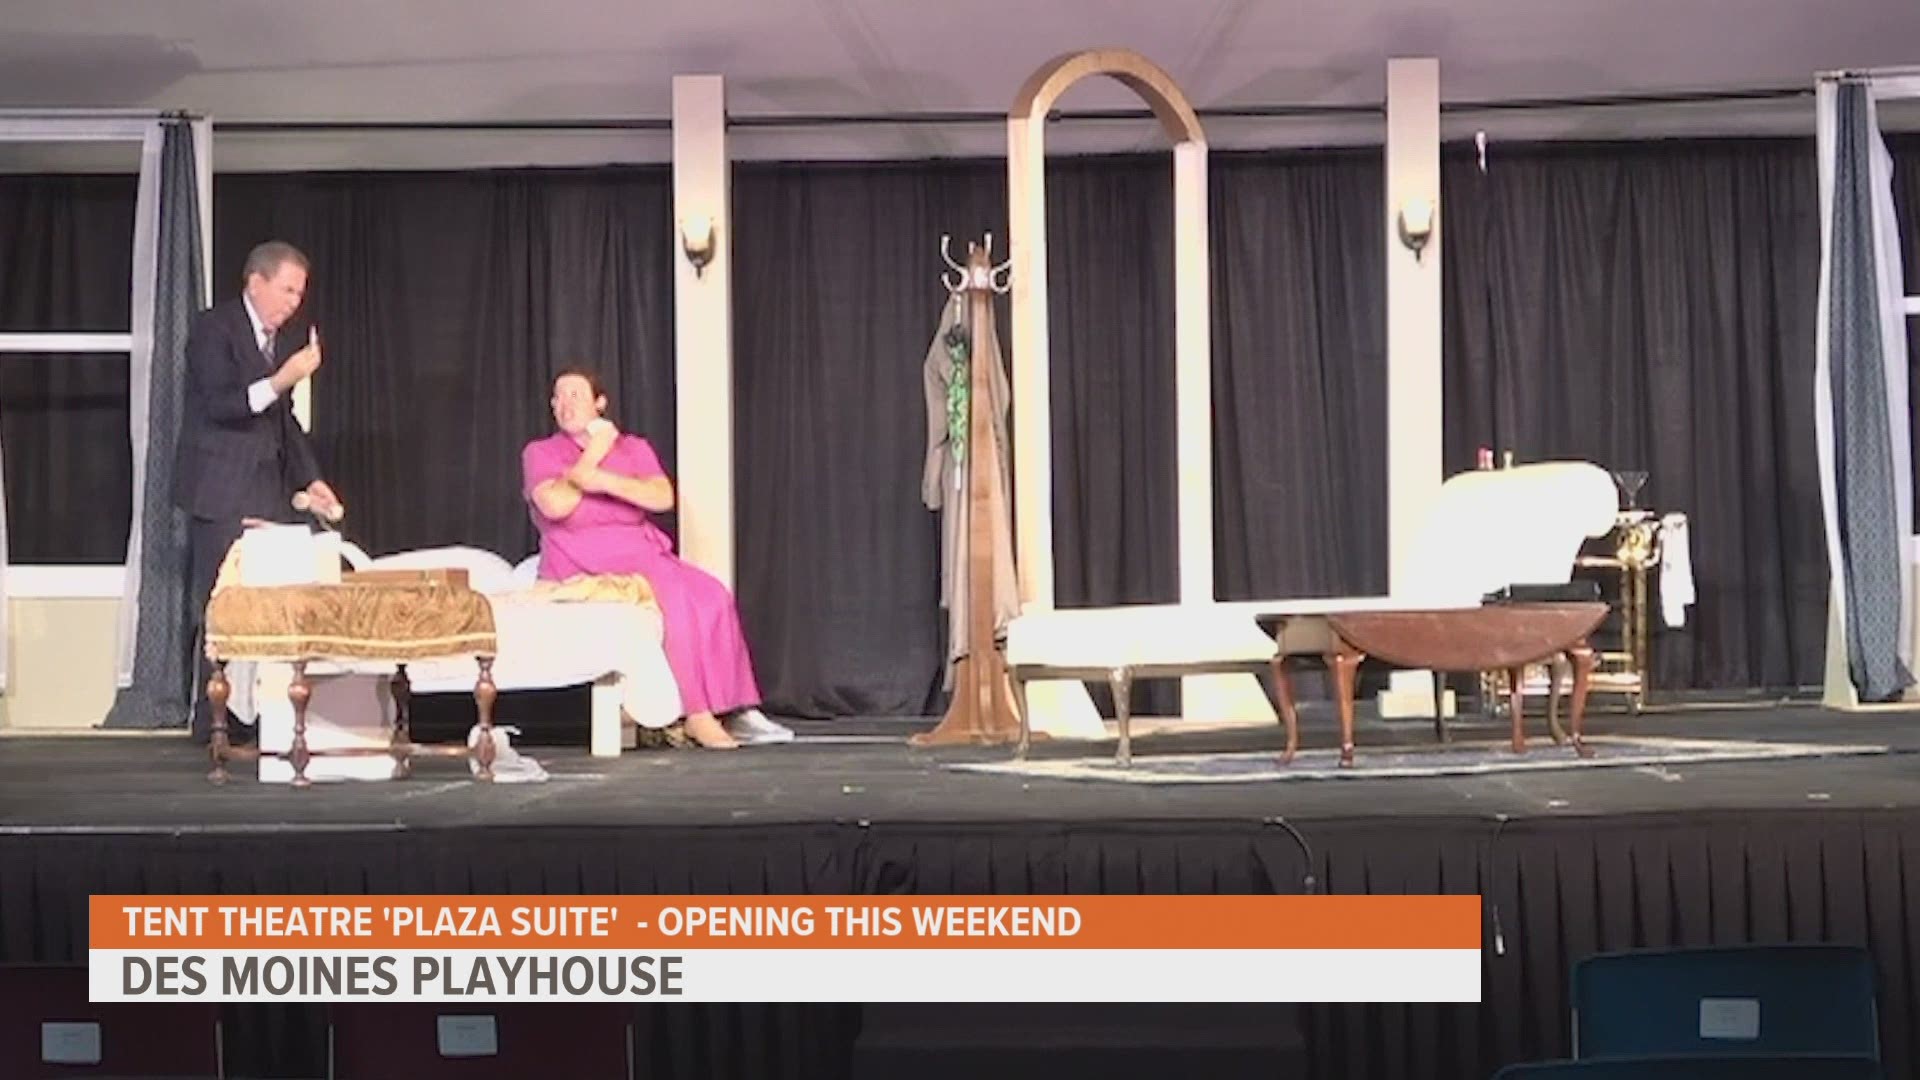 Neil Simon's "Plaza Suite" opens this weekend in at the Des Moines Playhouse